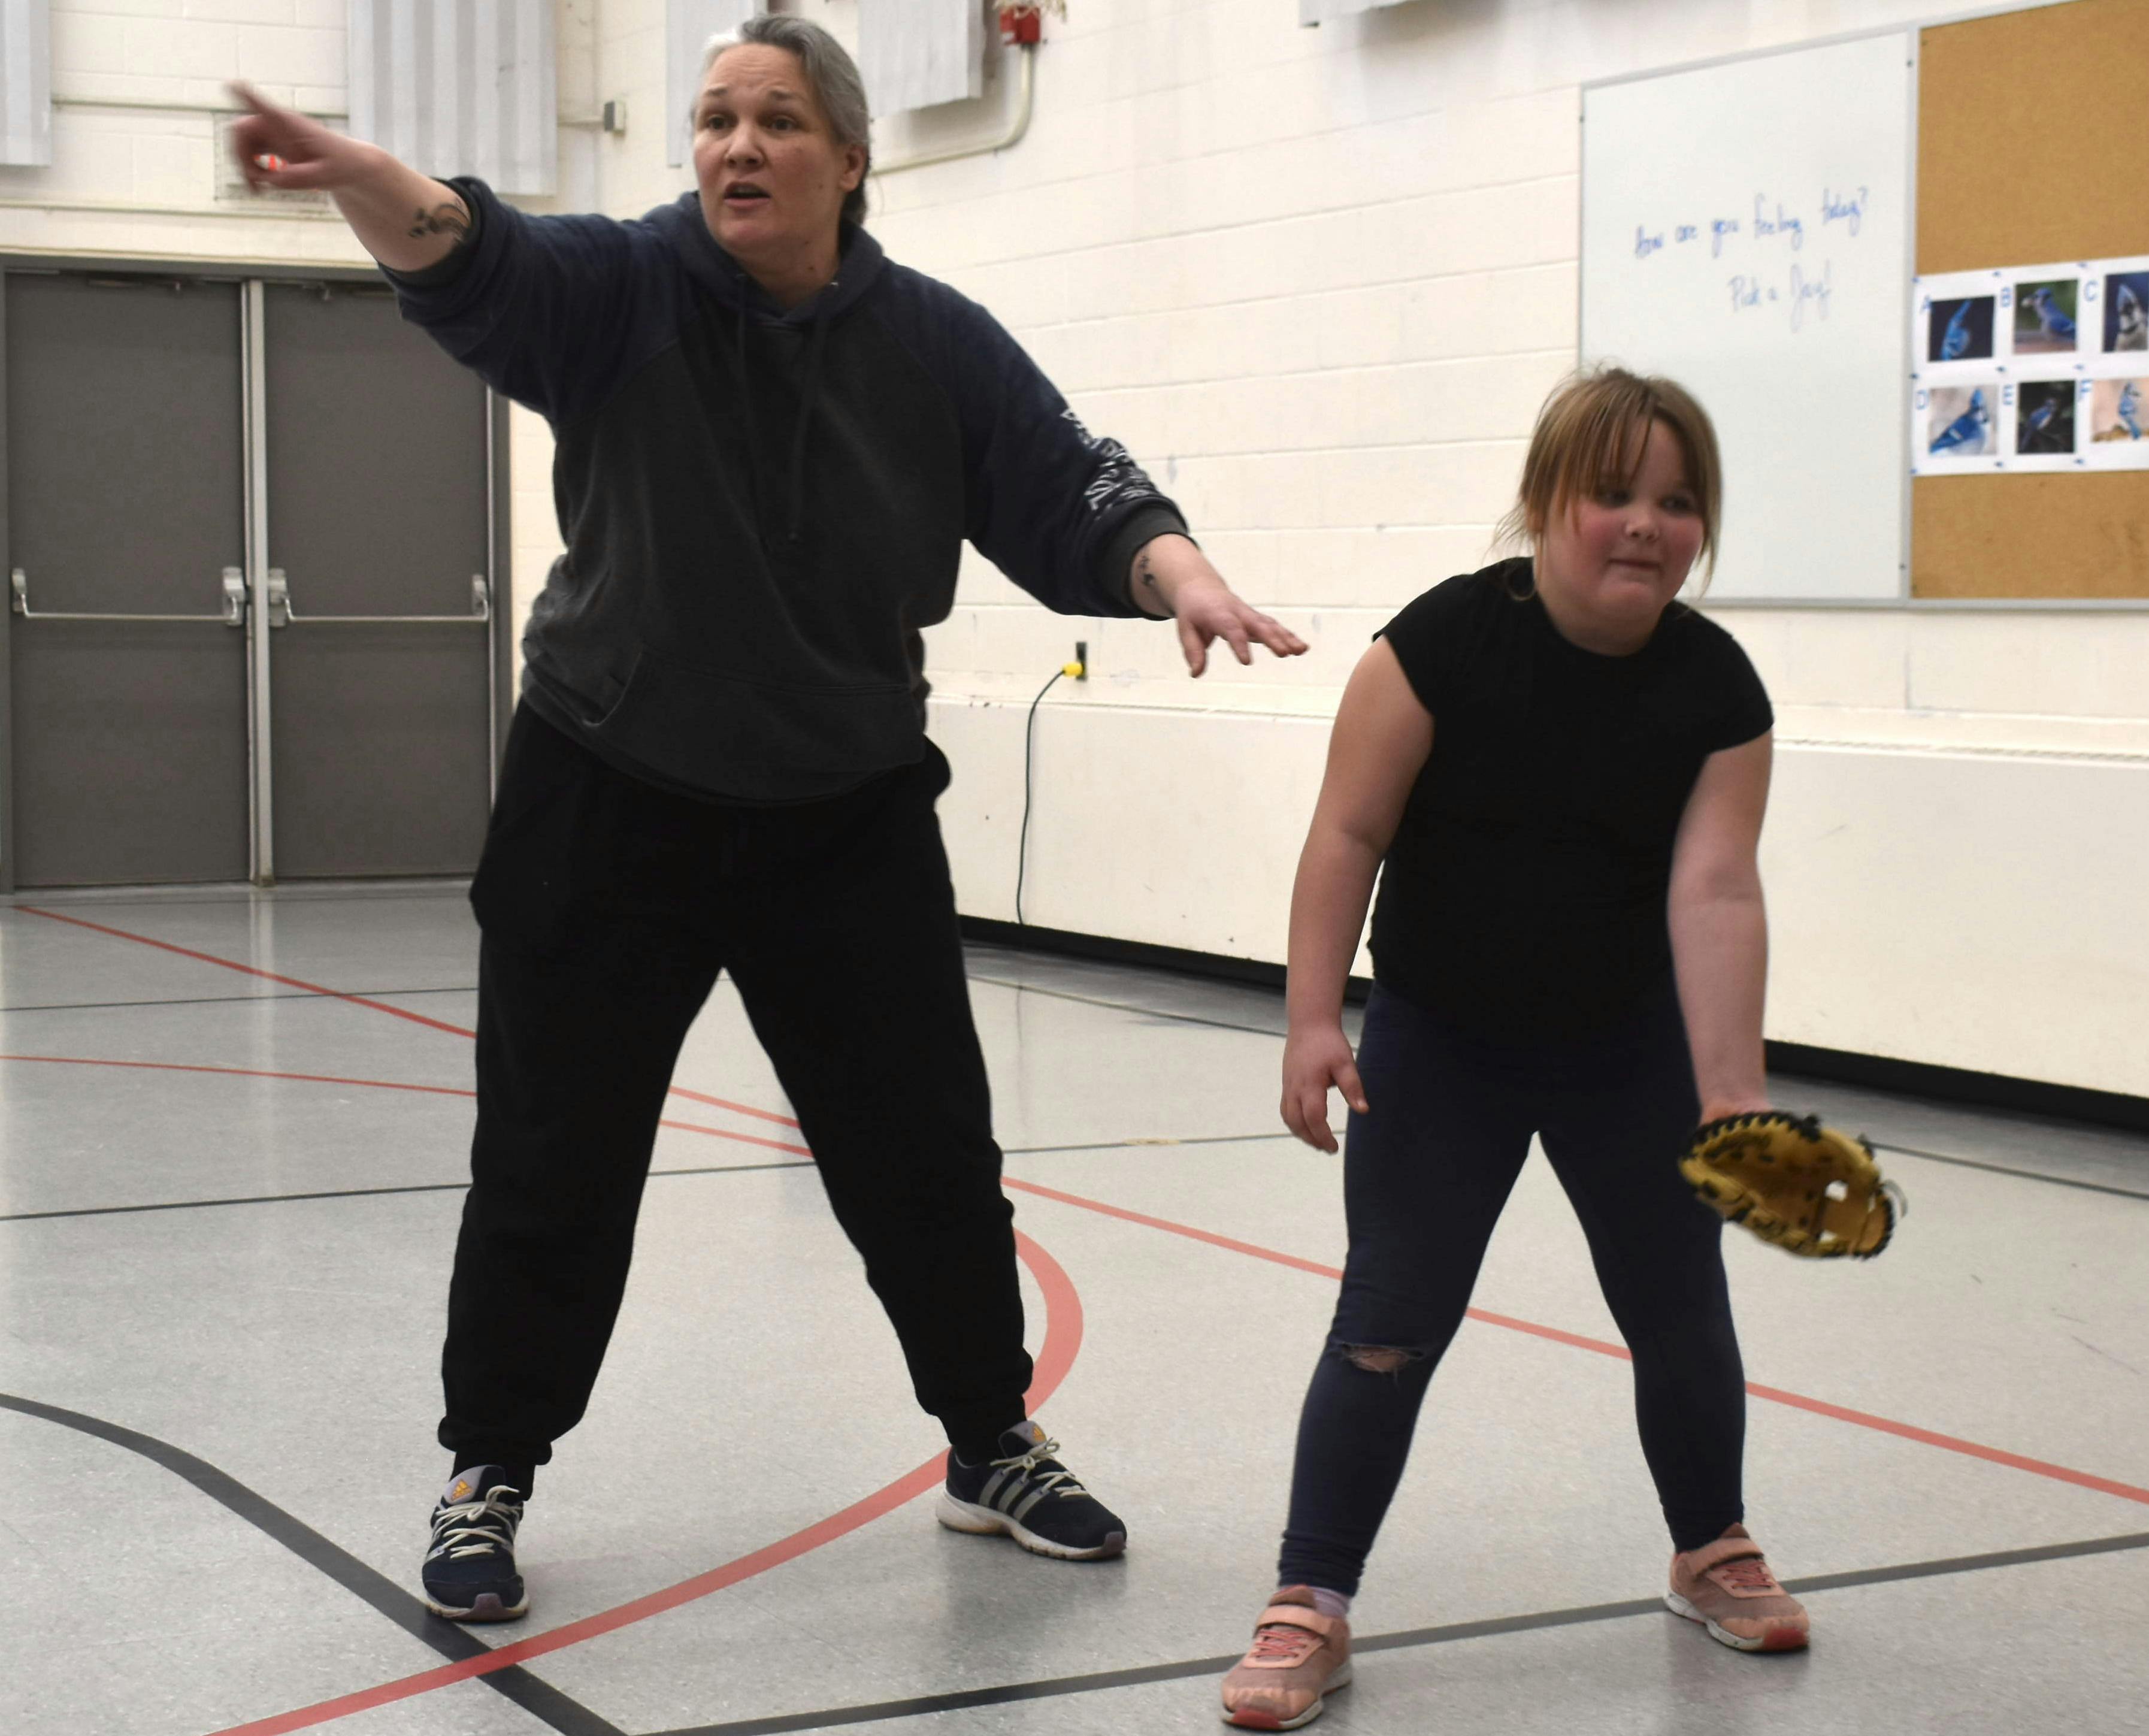 <p>Alison Kelly provides instruction while Jamie Roloson gets ready to field a ground ball at Athol South Marysburgh school. (Jason Parks/Gazette Staff)</p>
